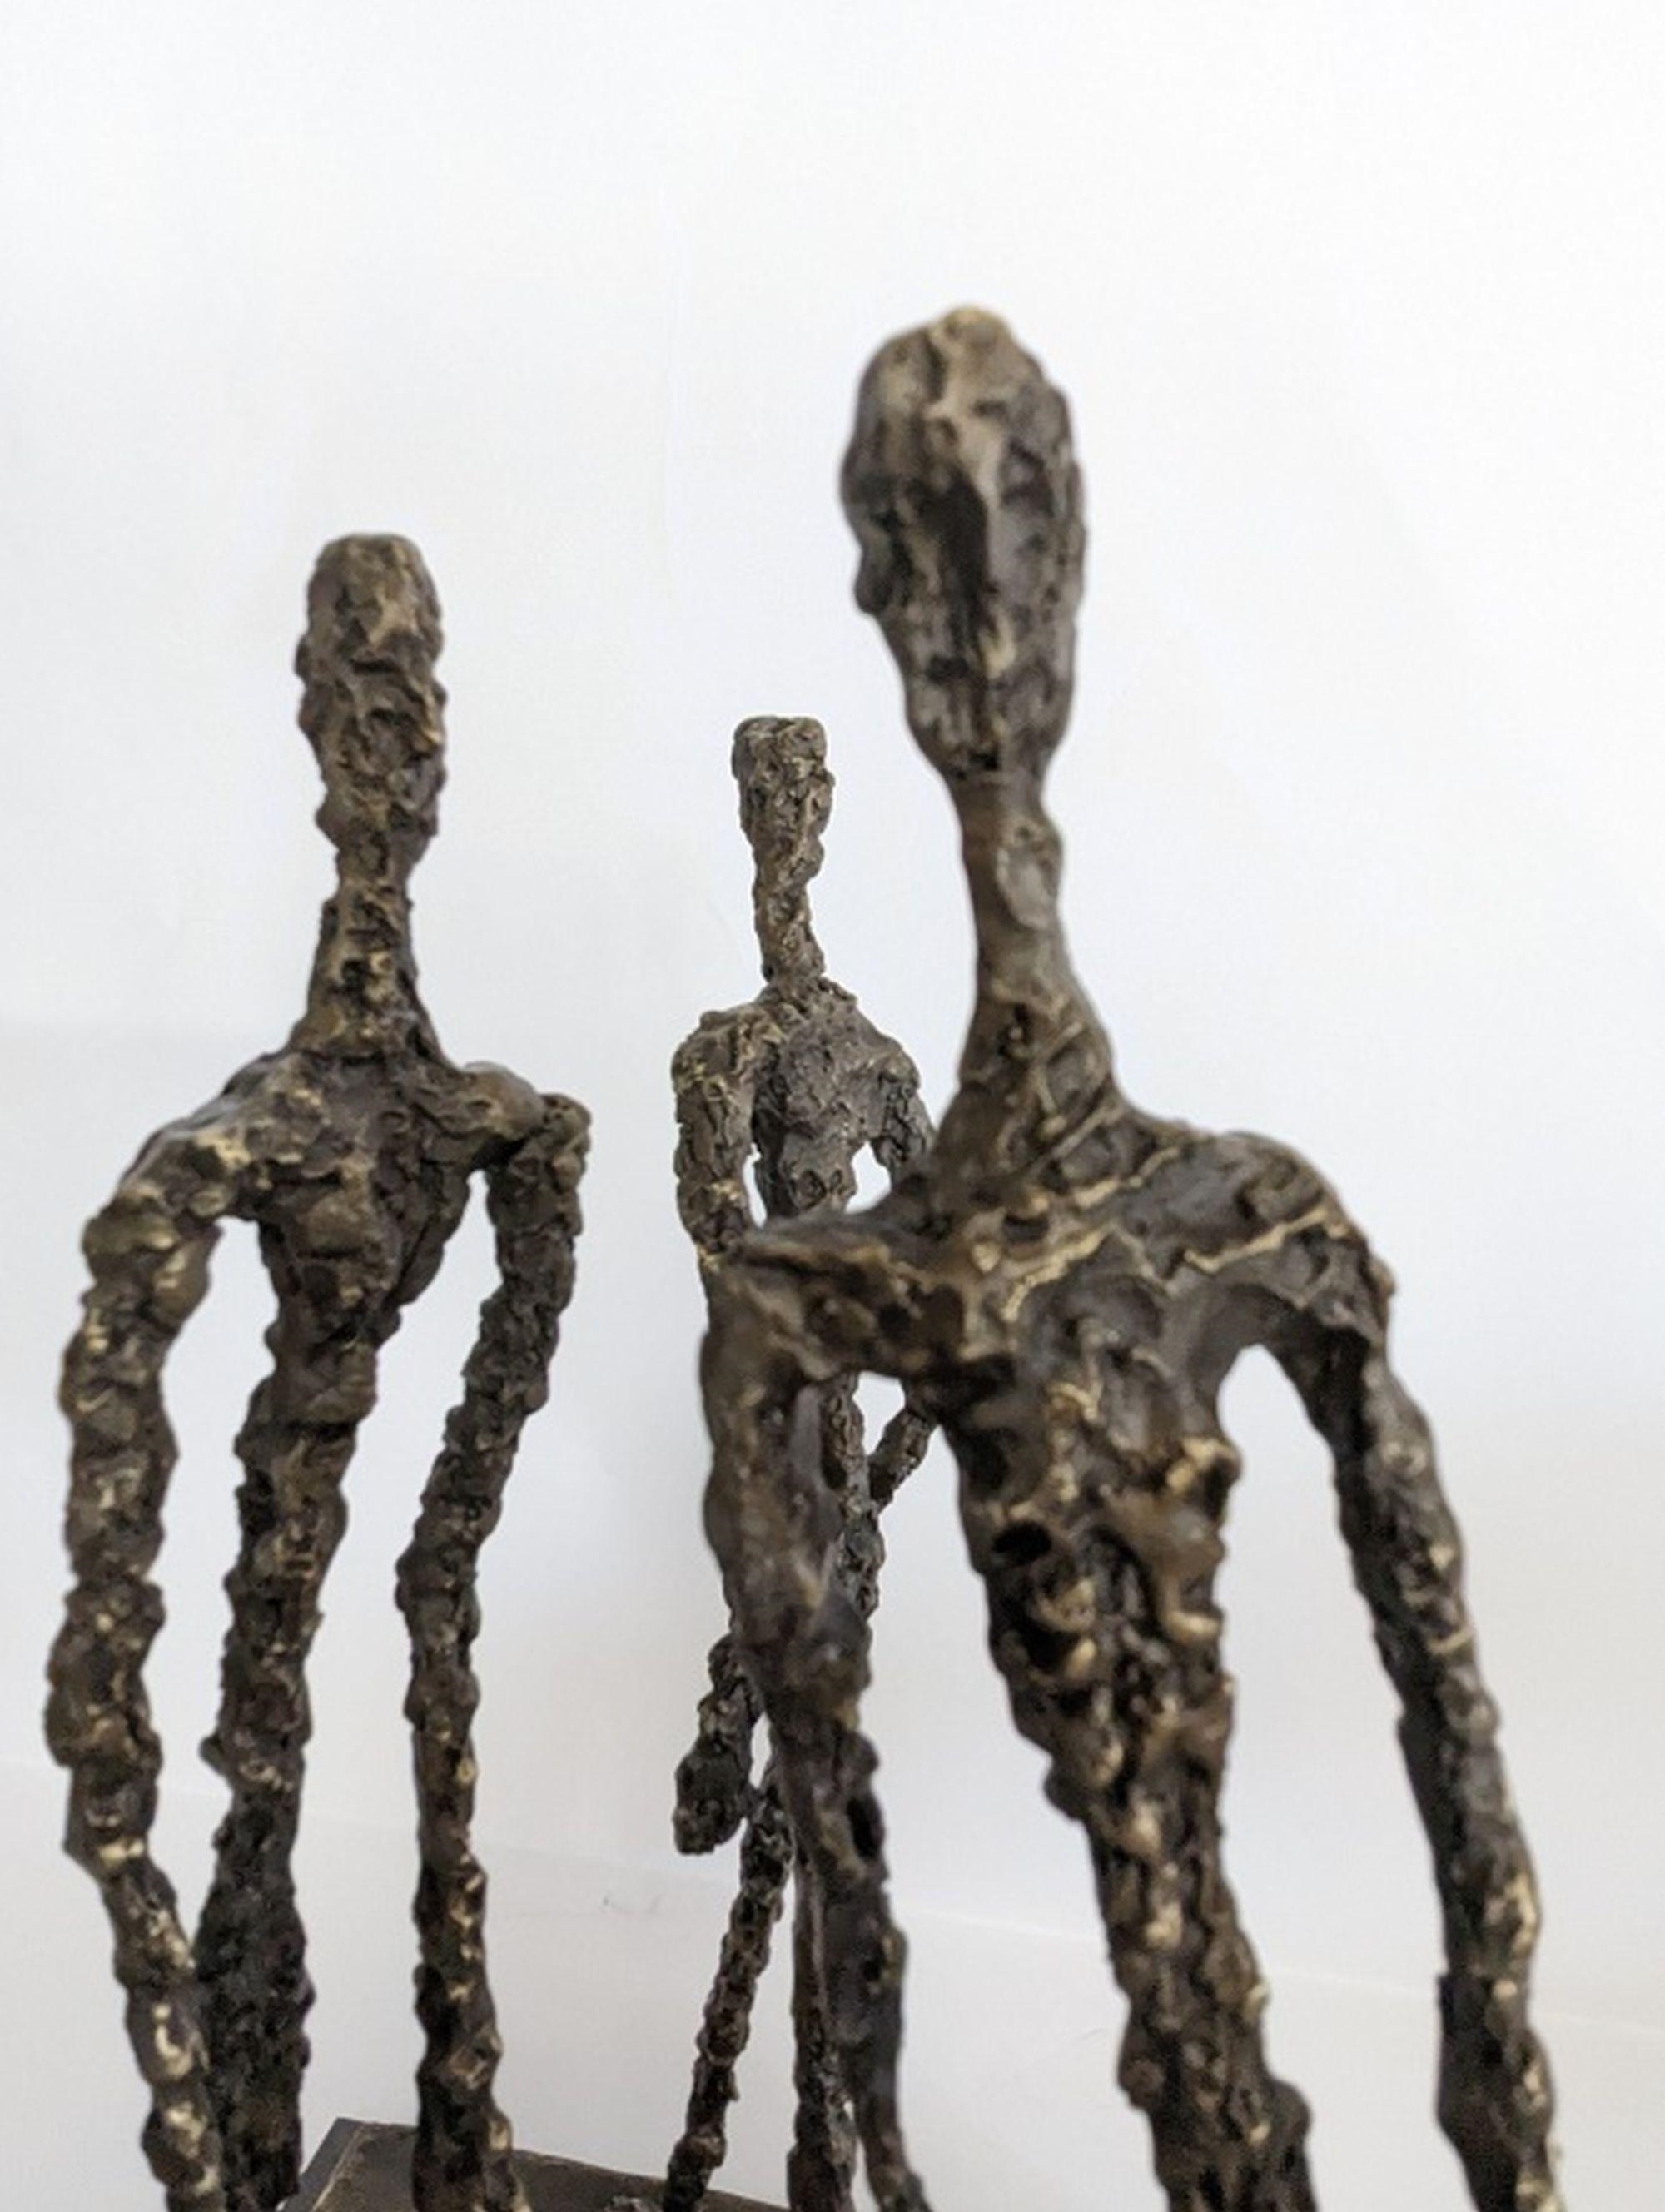 Artwork by Alberto Giacometti, Three Men Walking, Made of Bronze with applied patina on marble base